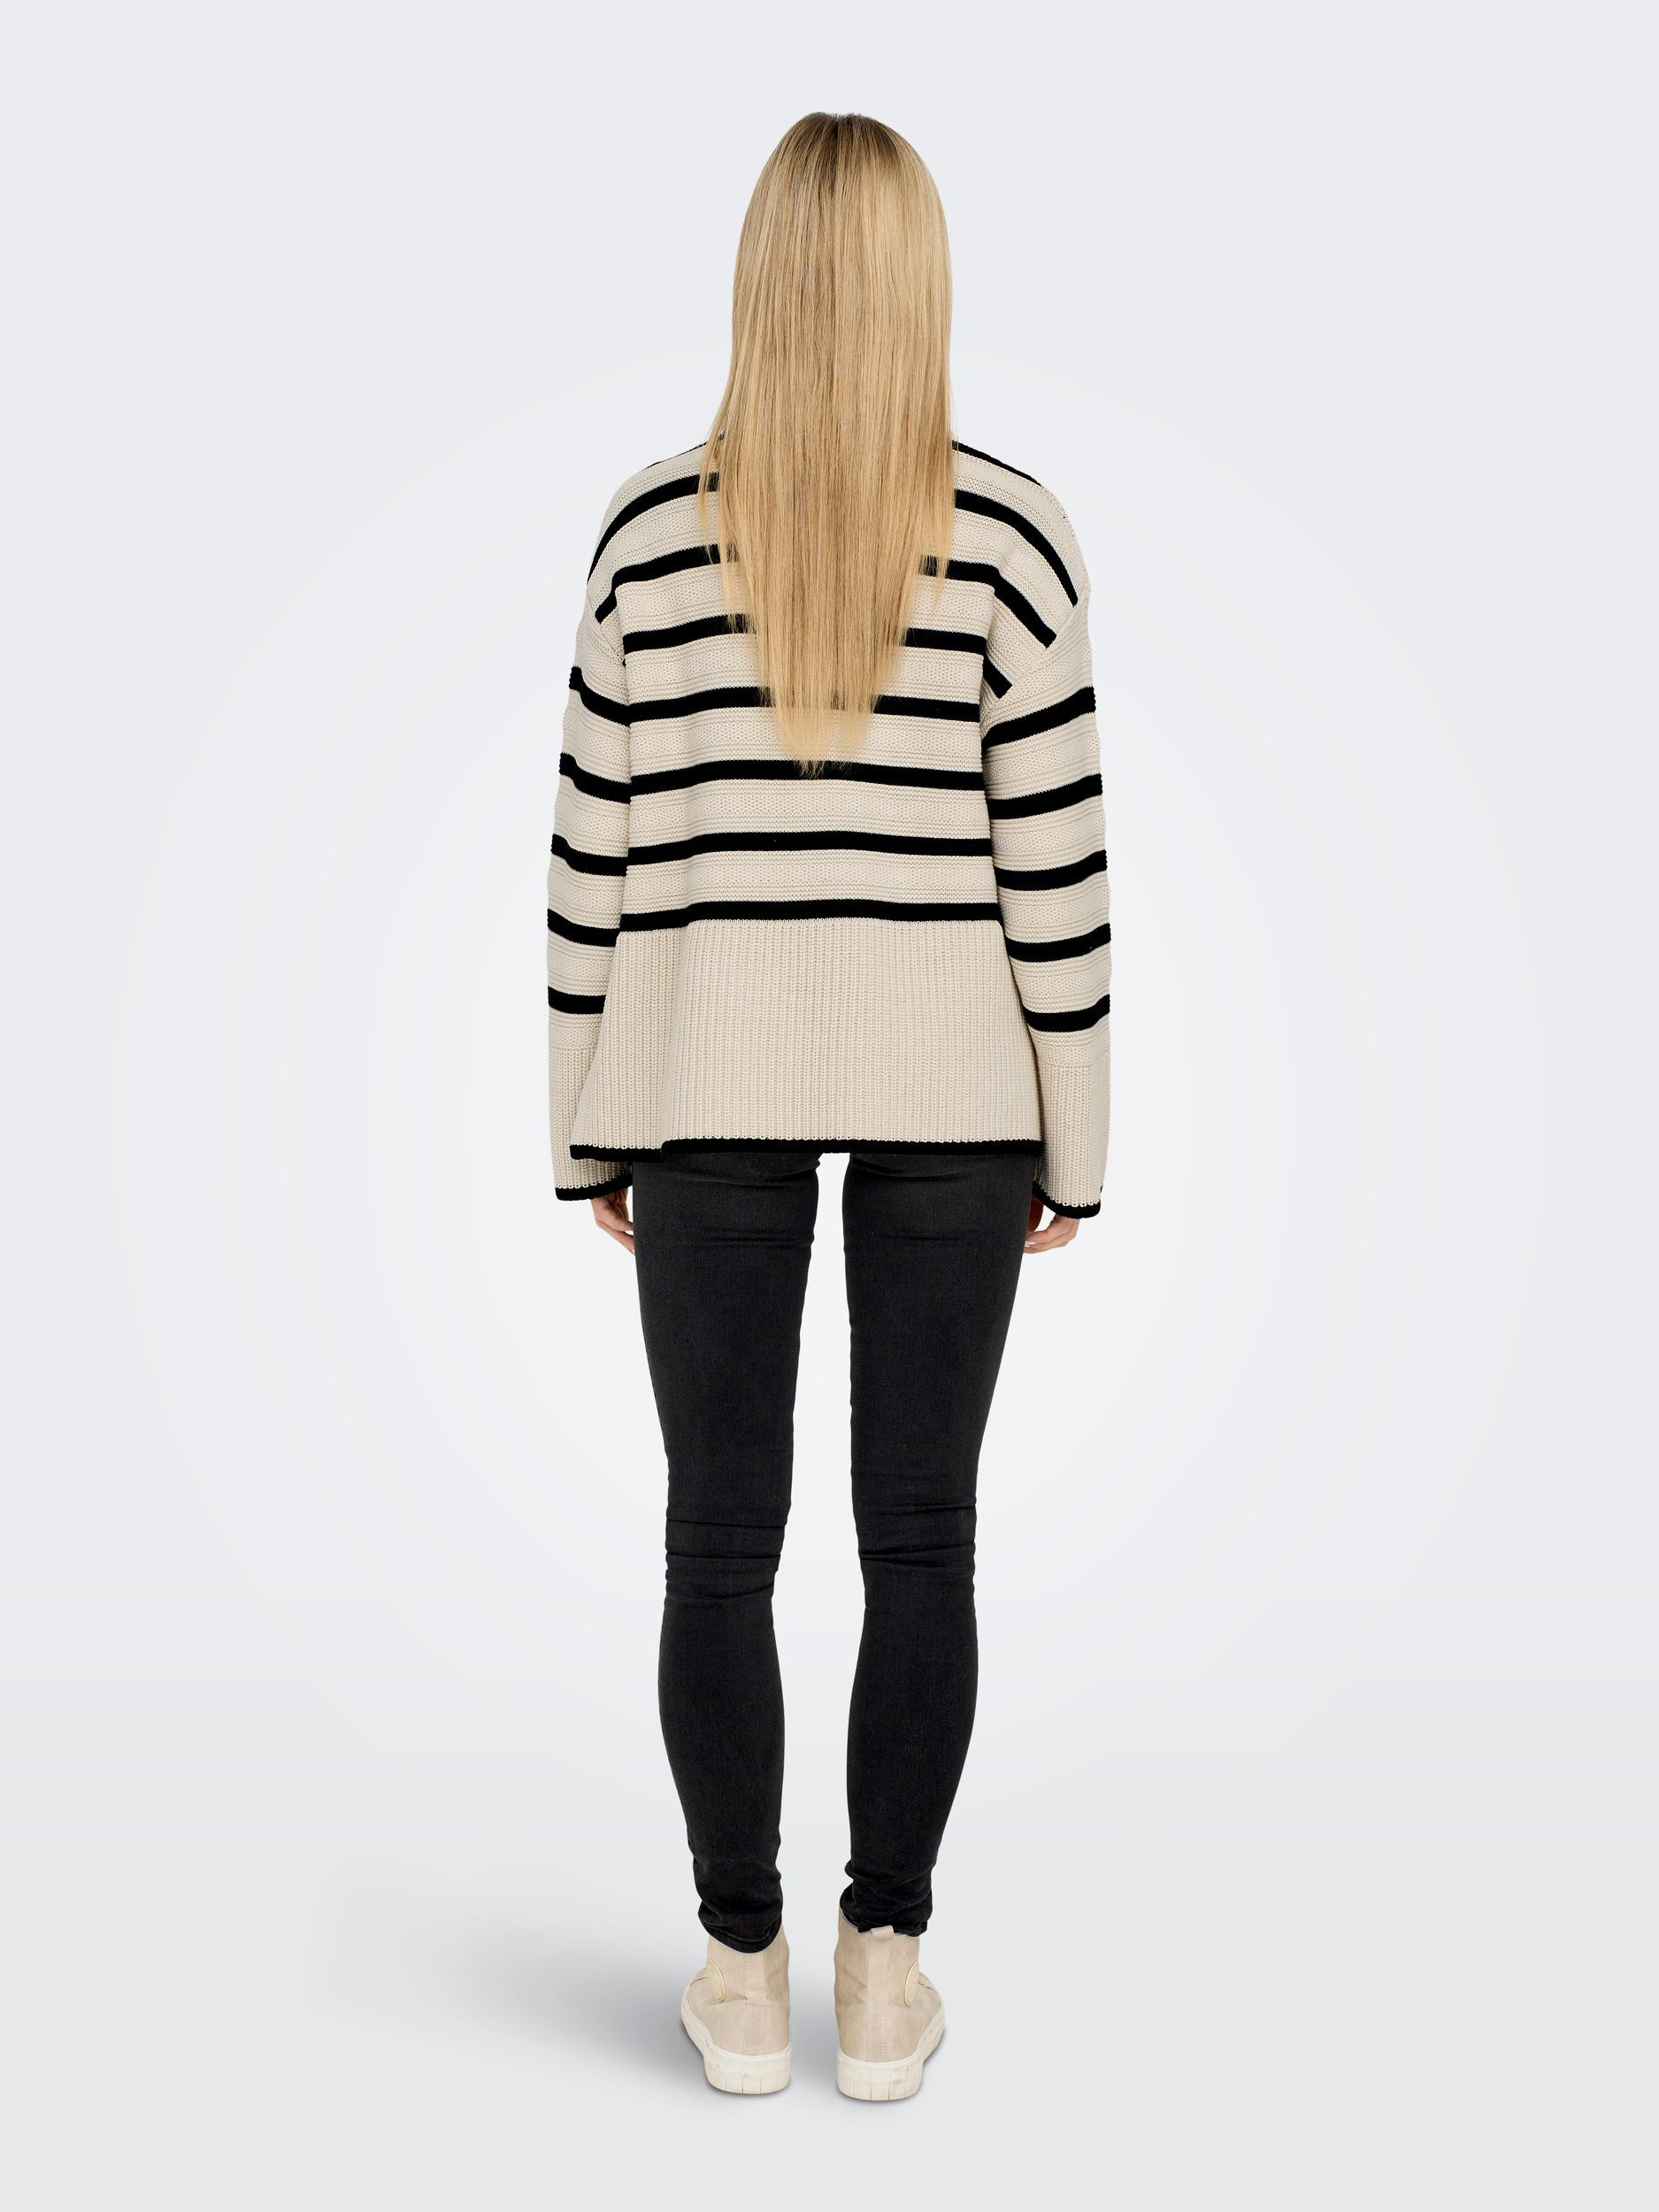 Only - Striped cotton blend sweater, Beige, large image number 3